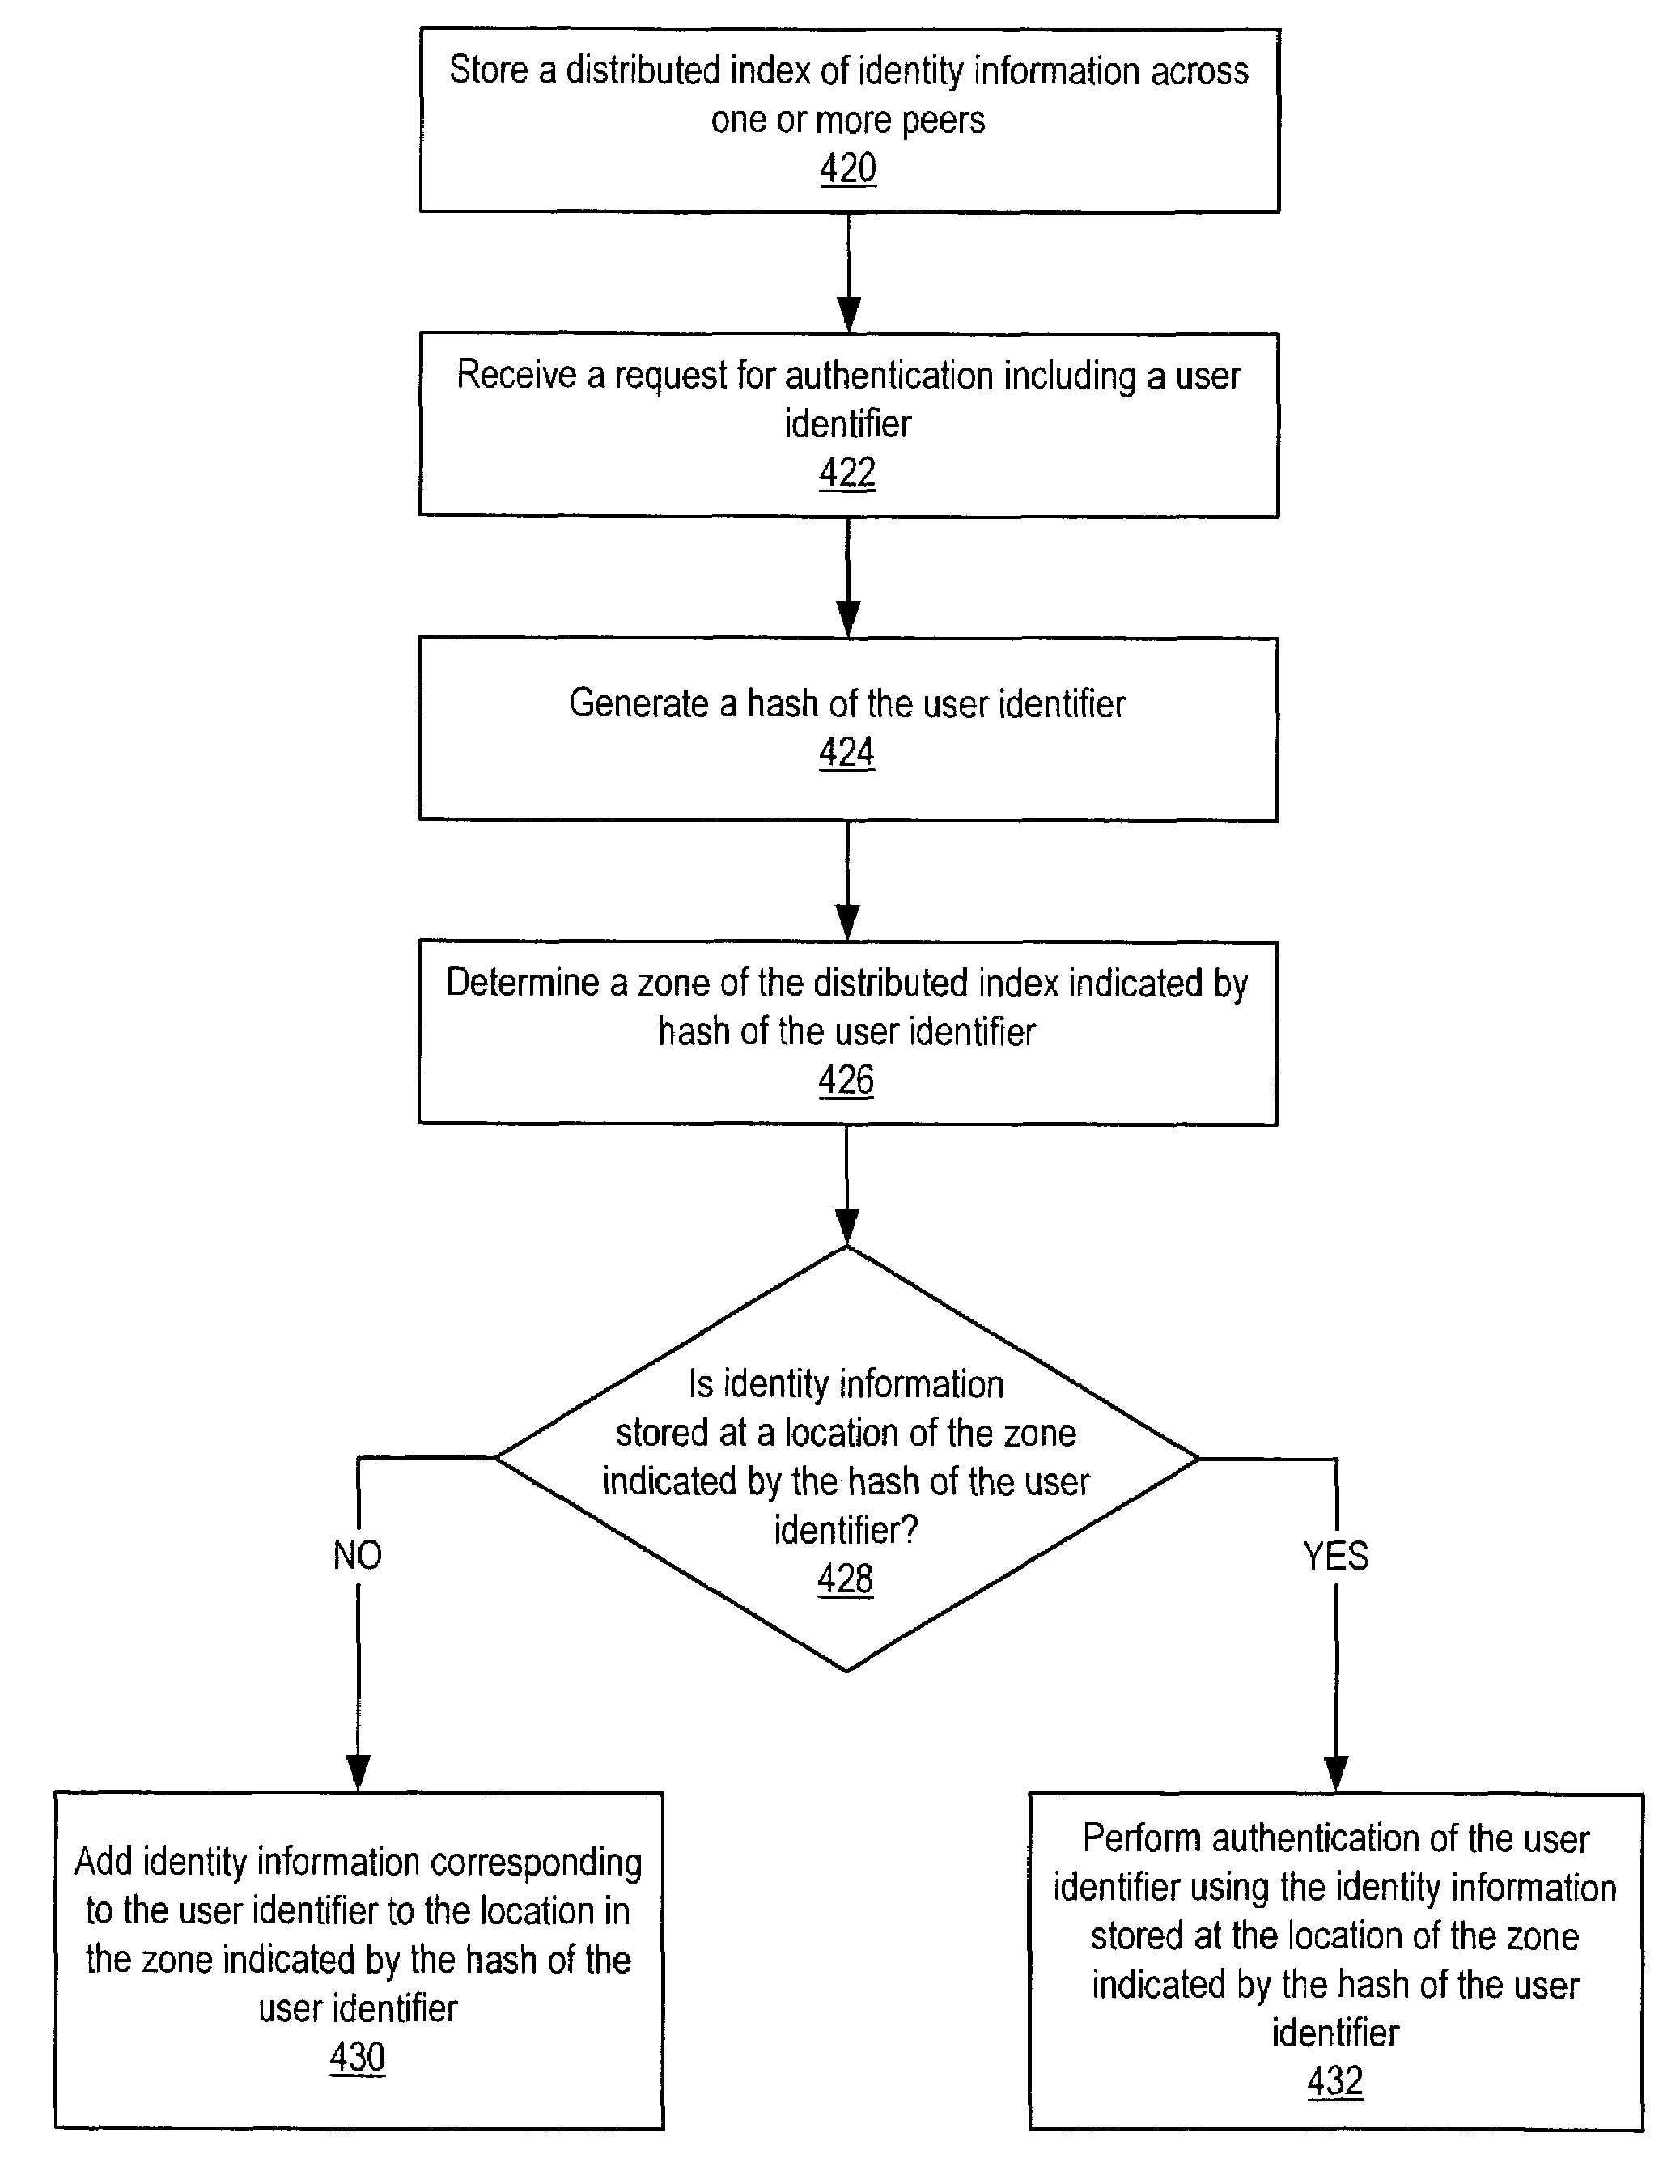 Distributed indexing of identity information in a peer-to-peer network